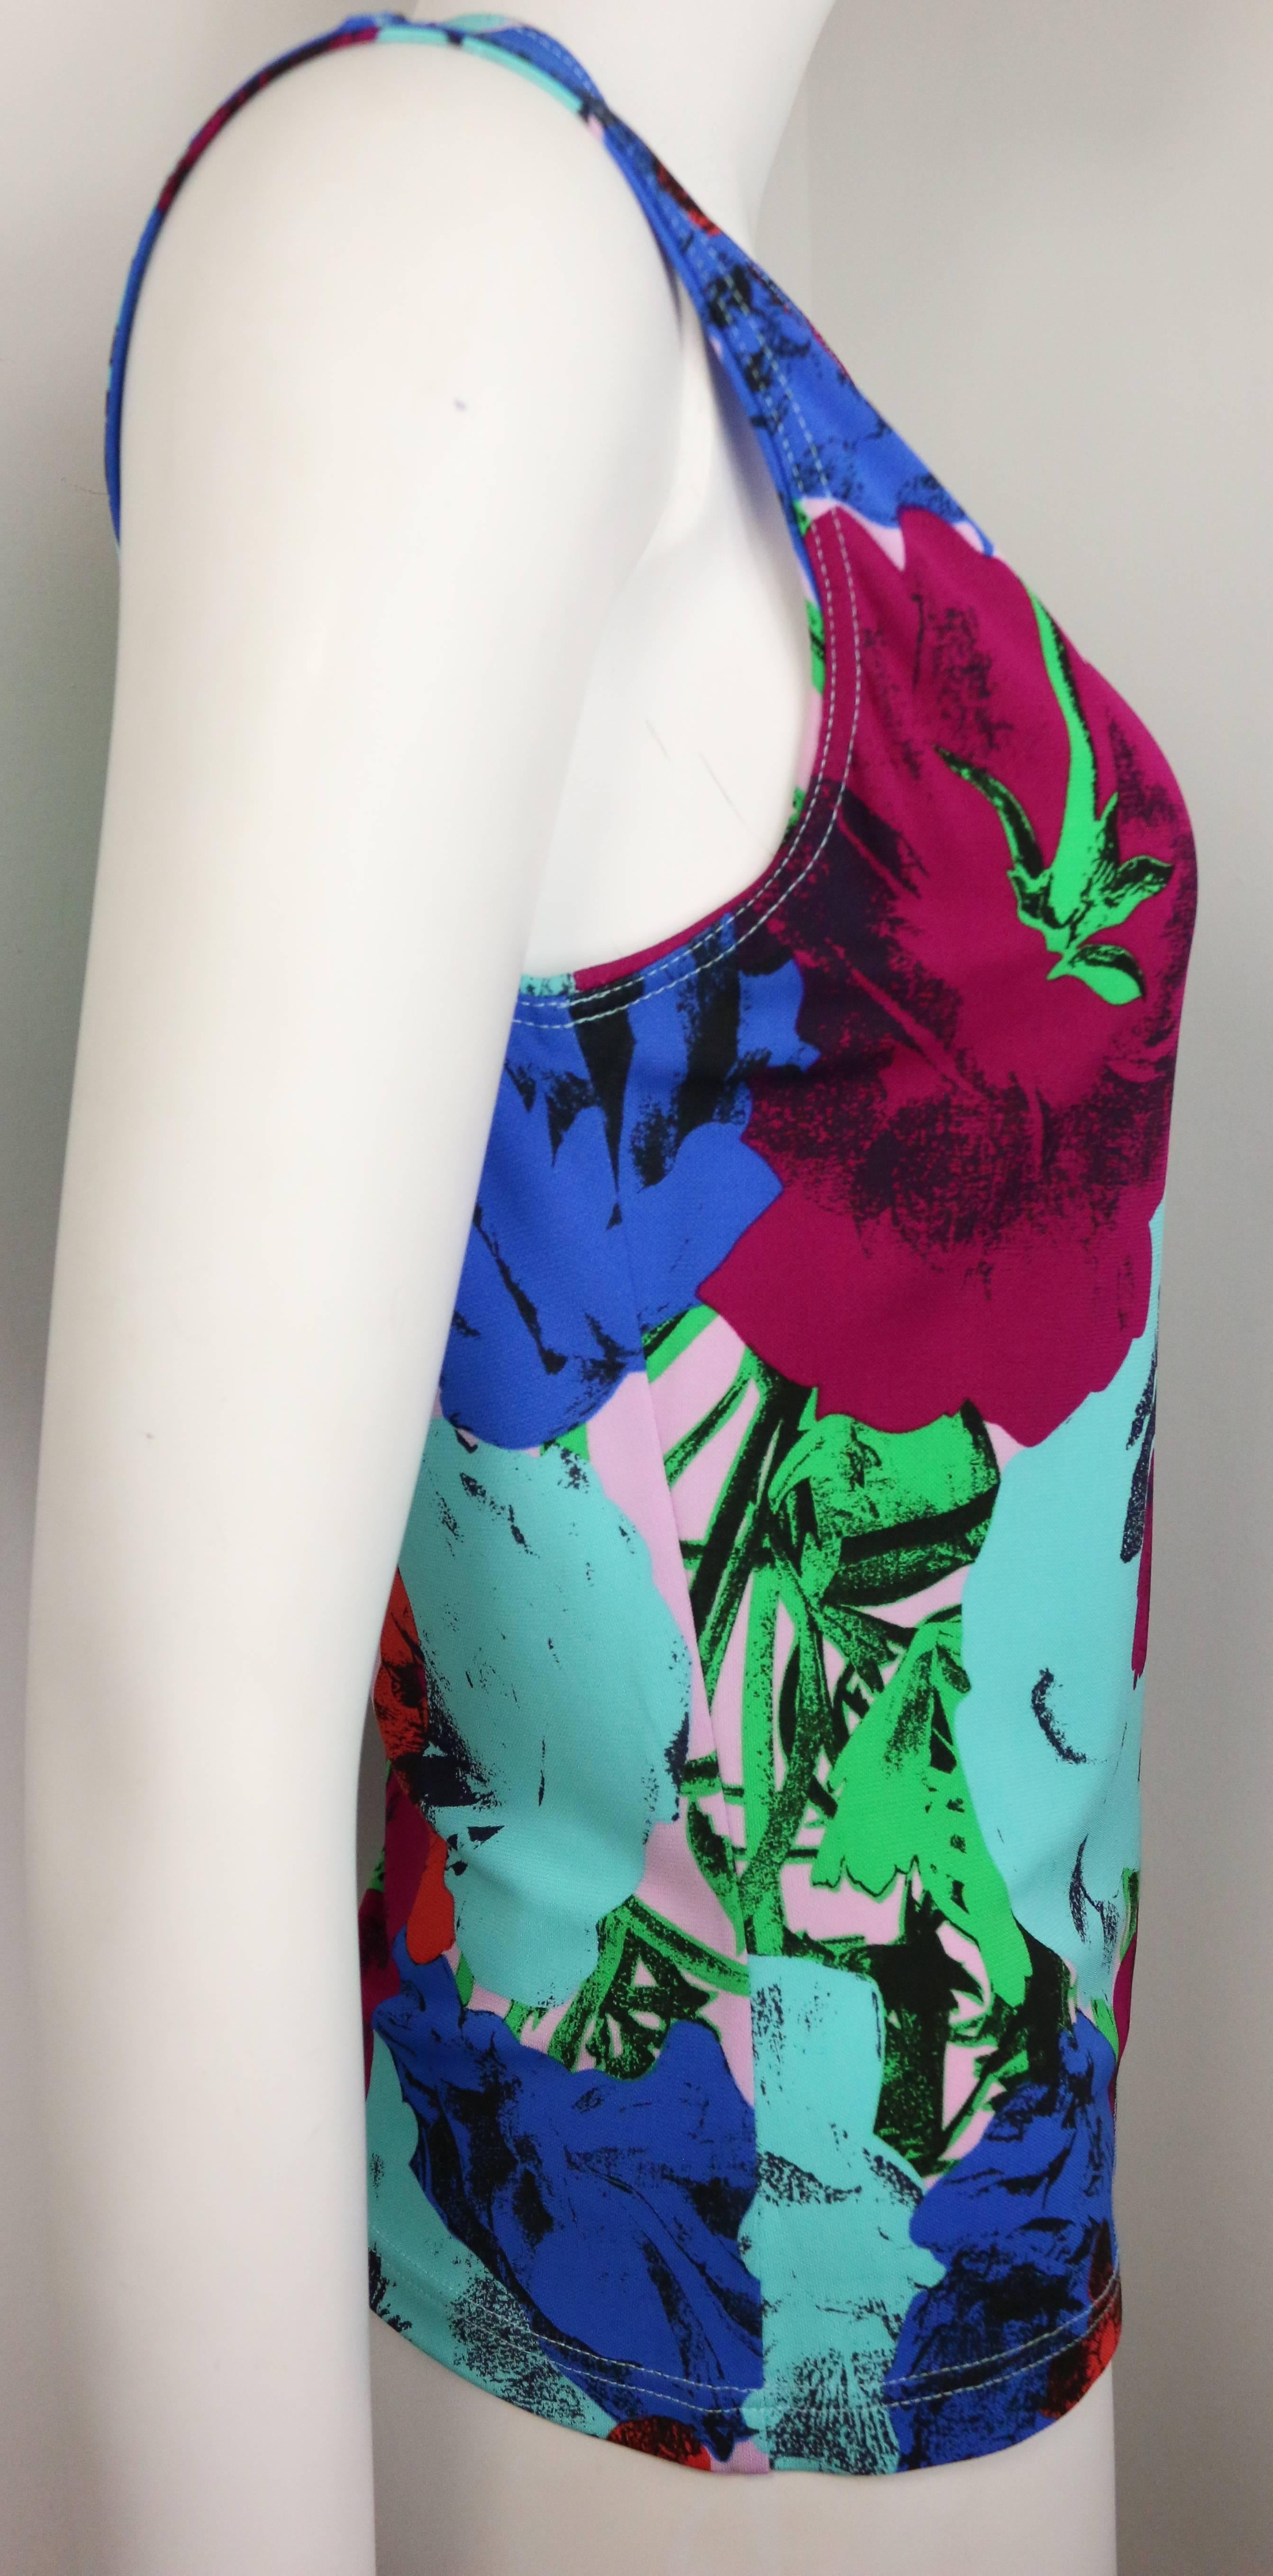 - VIntage 90s Gianni Versace Couture colour(blue, turquoise, red, pink and green) floral print tank top. 

- Made in Italy. 

- Size 10. 

- 100% Rayon. 